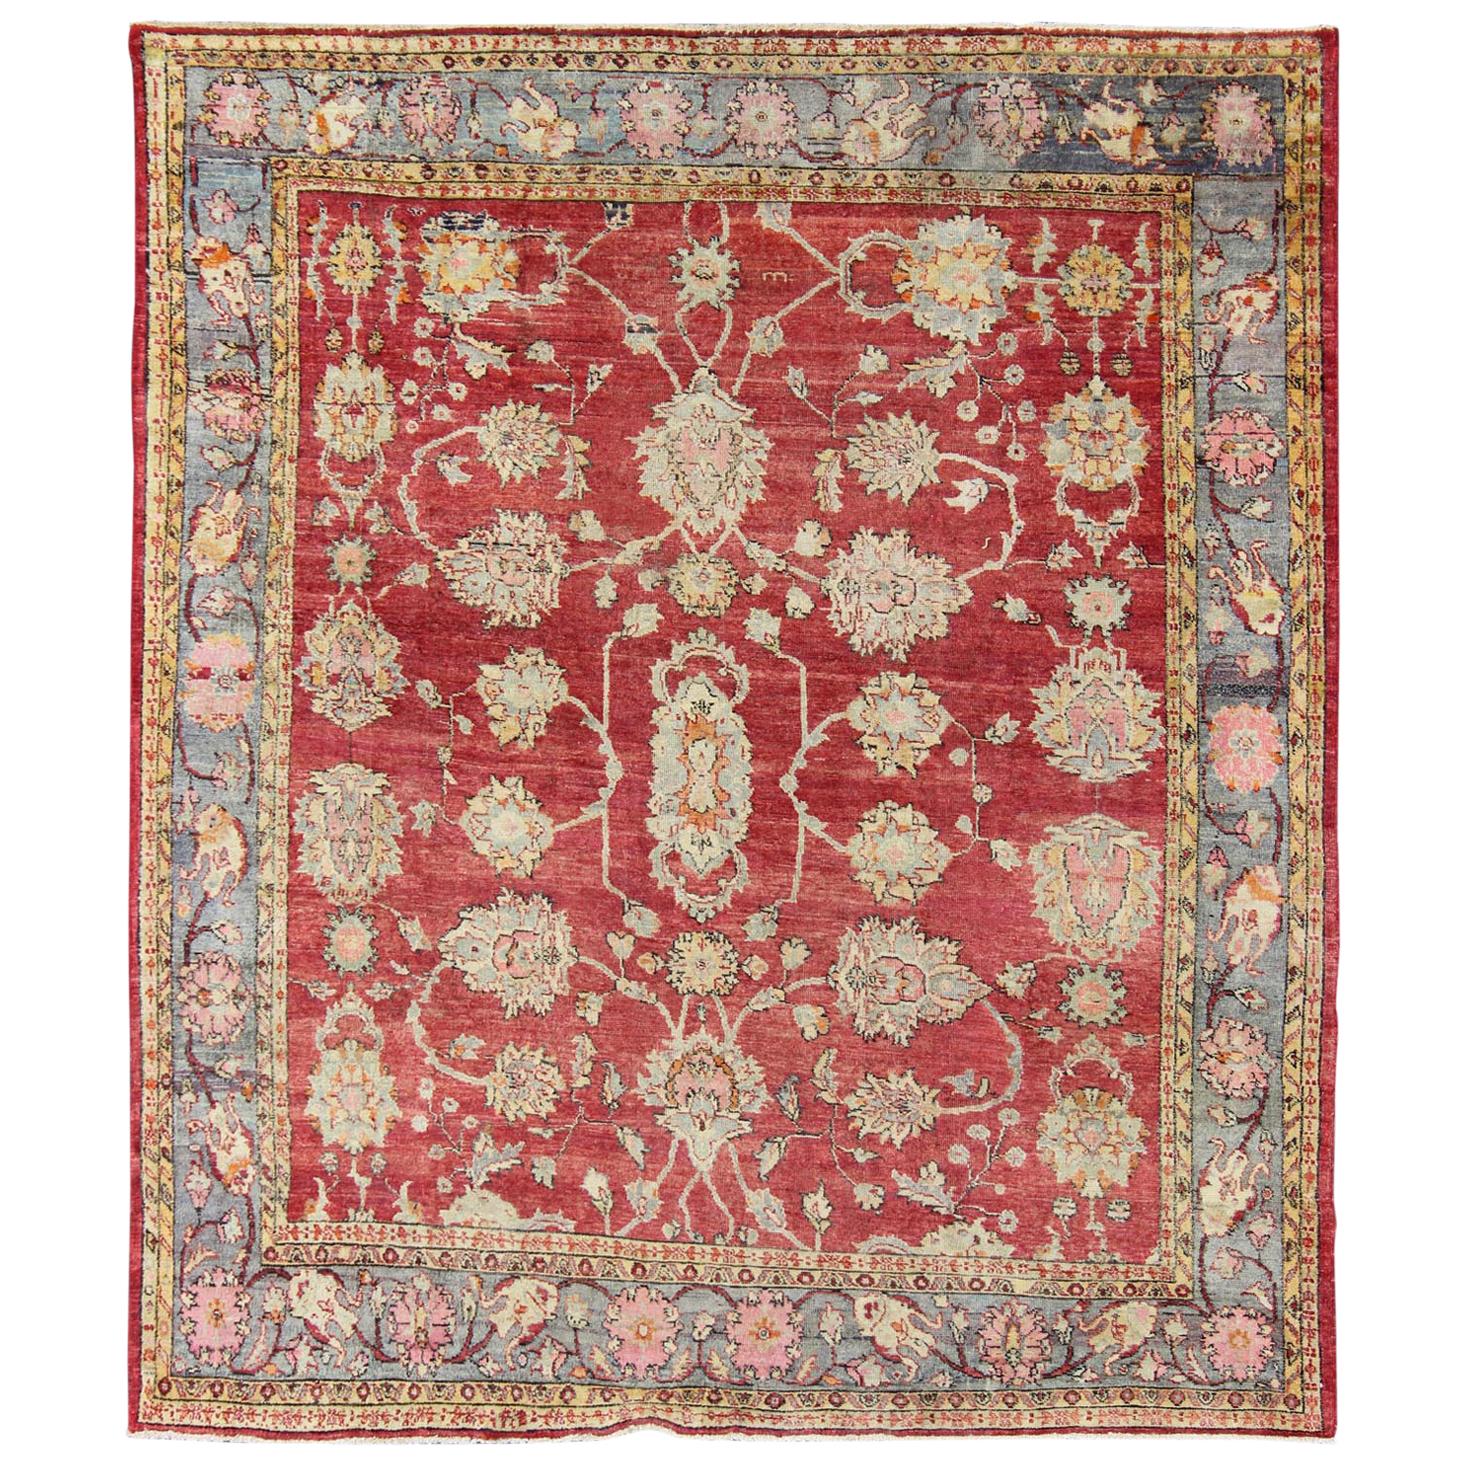 Antique Turkish Oushak Rug in Red, Blue/Gray Border, L. Green, Yellow & Pink For Sale